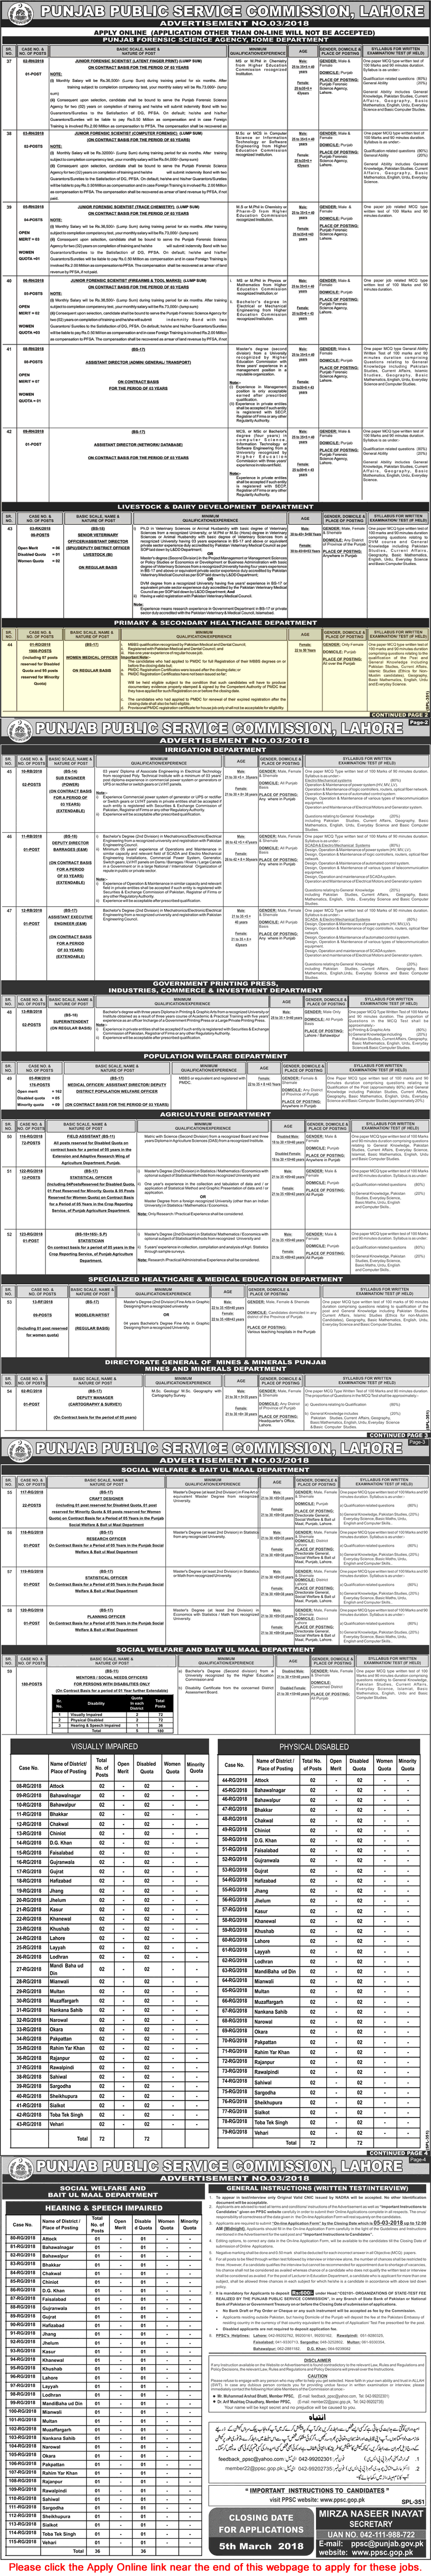 Women Medical Officer Jobs in Primary and Secondary Healthcare Department Punjab 2018 February PPSC Apply Online Latest